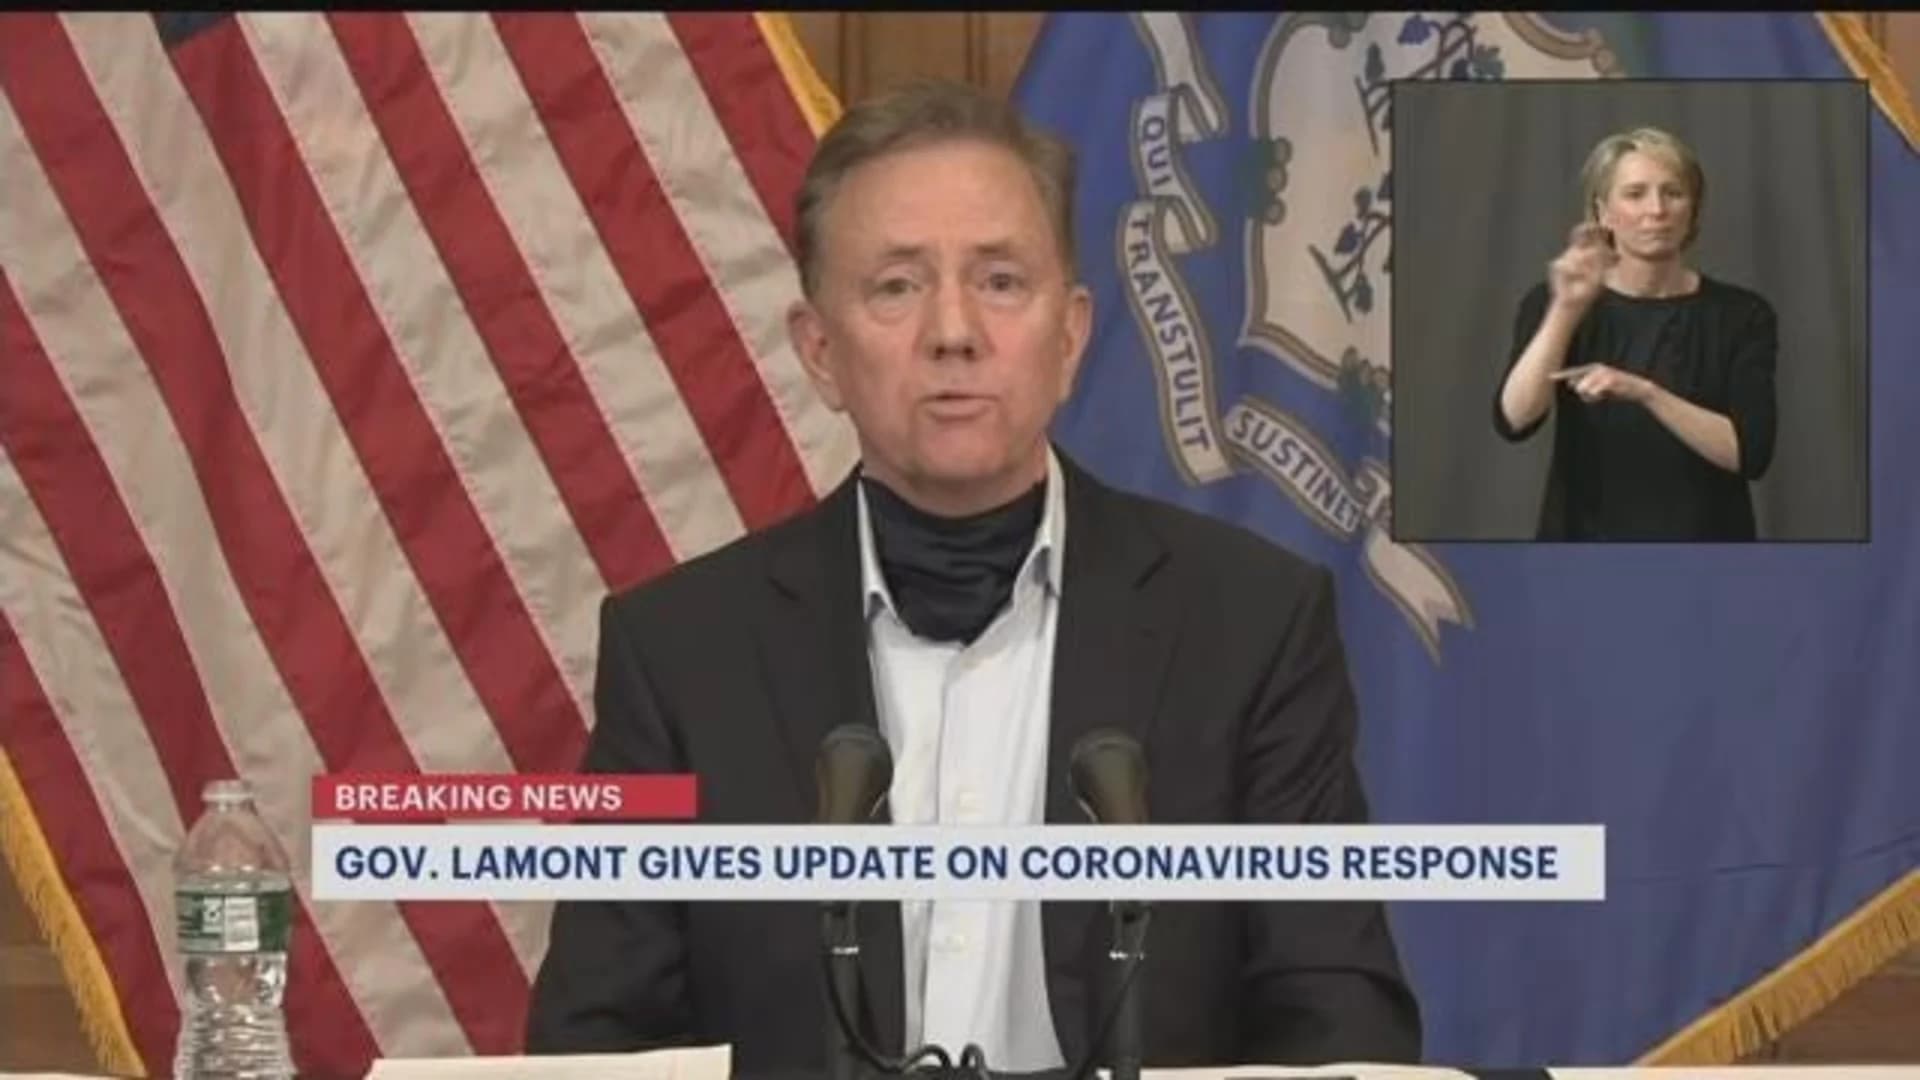 Gov. Lamont: Health insurers in CT to waive all out-of-pocket costs for COVID-19 testing, treatment